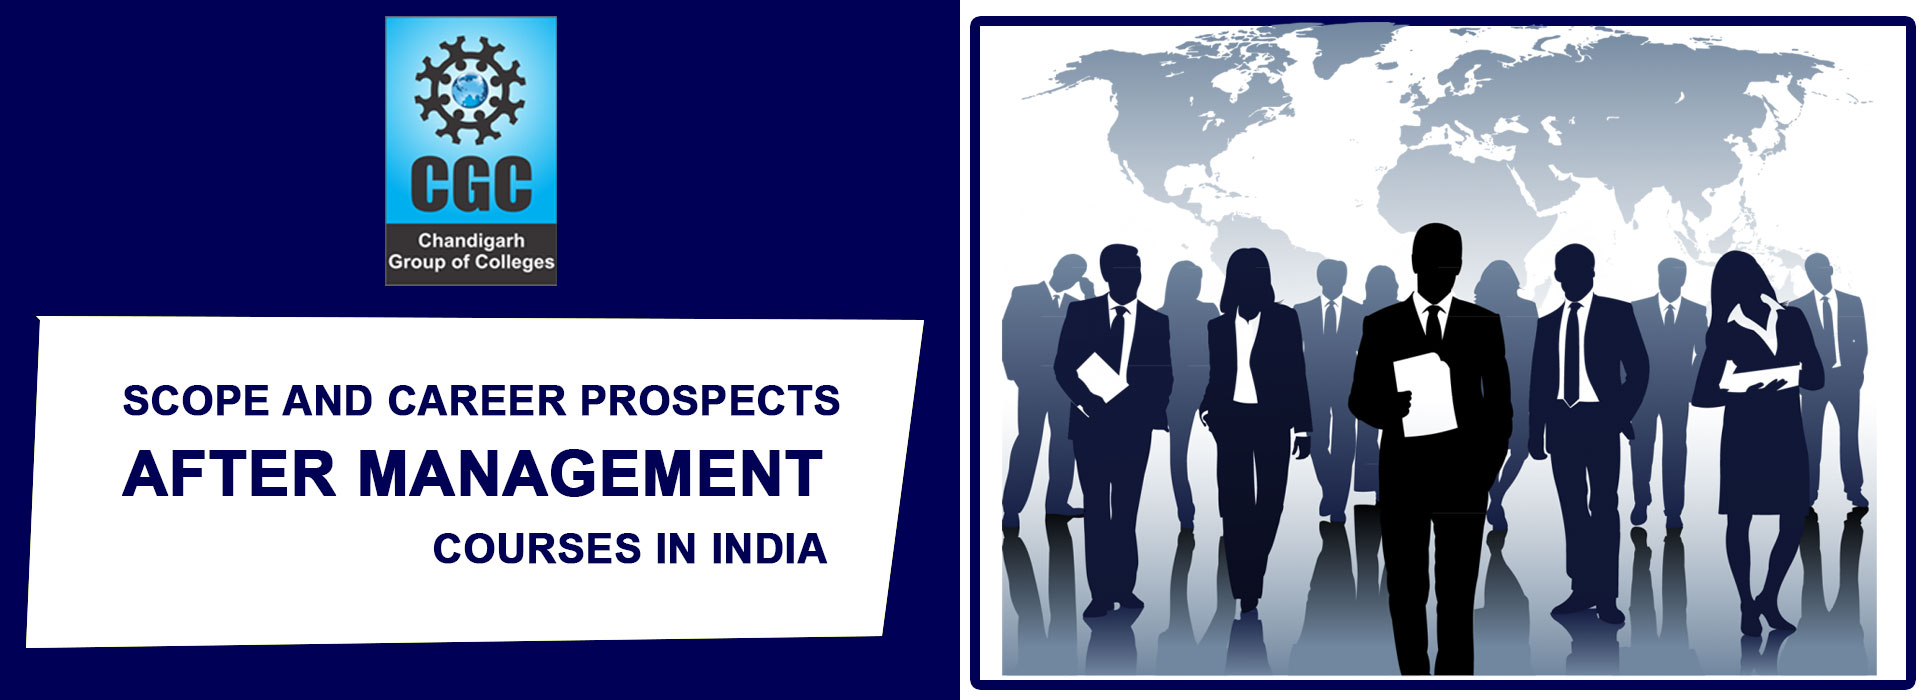 SCOPE AND CAREER PROSPECTS AFTER MANAGEMENT COURSES IN INDIA 